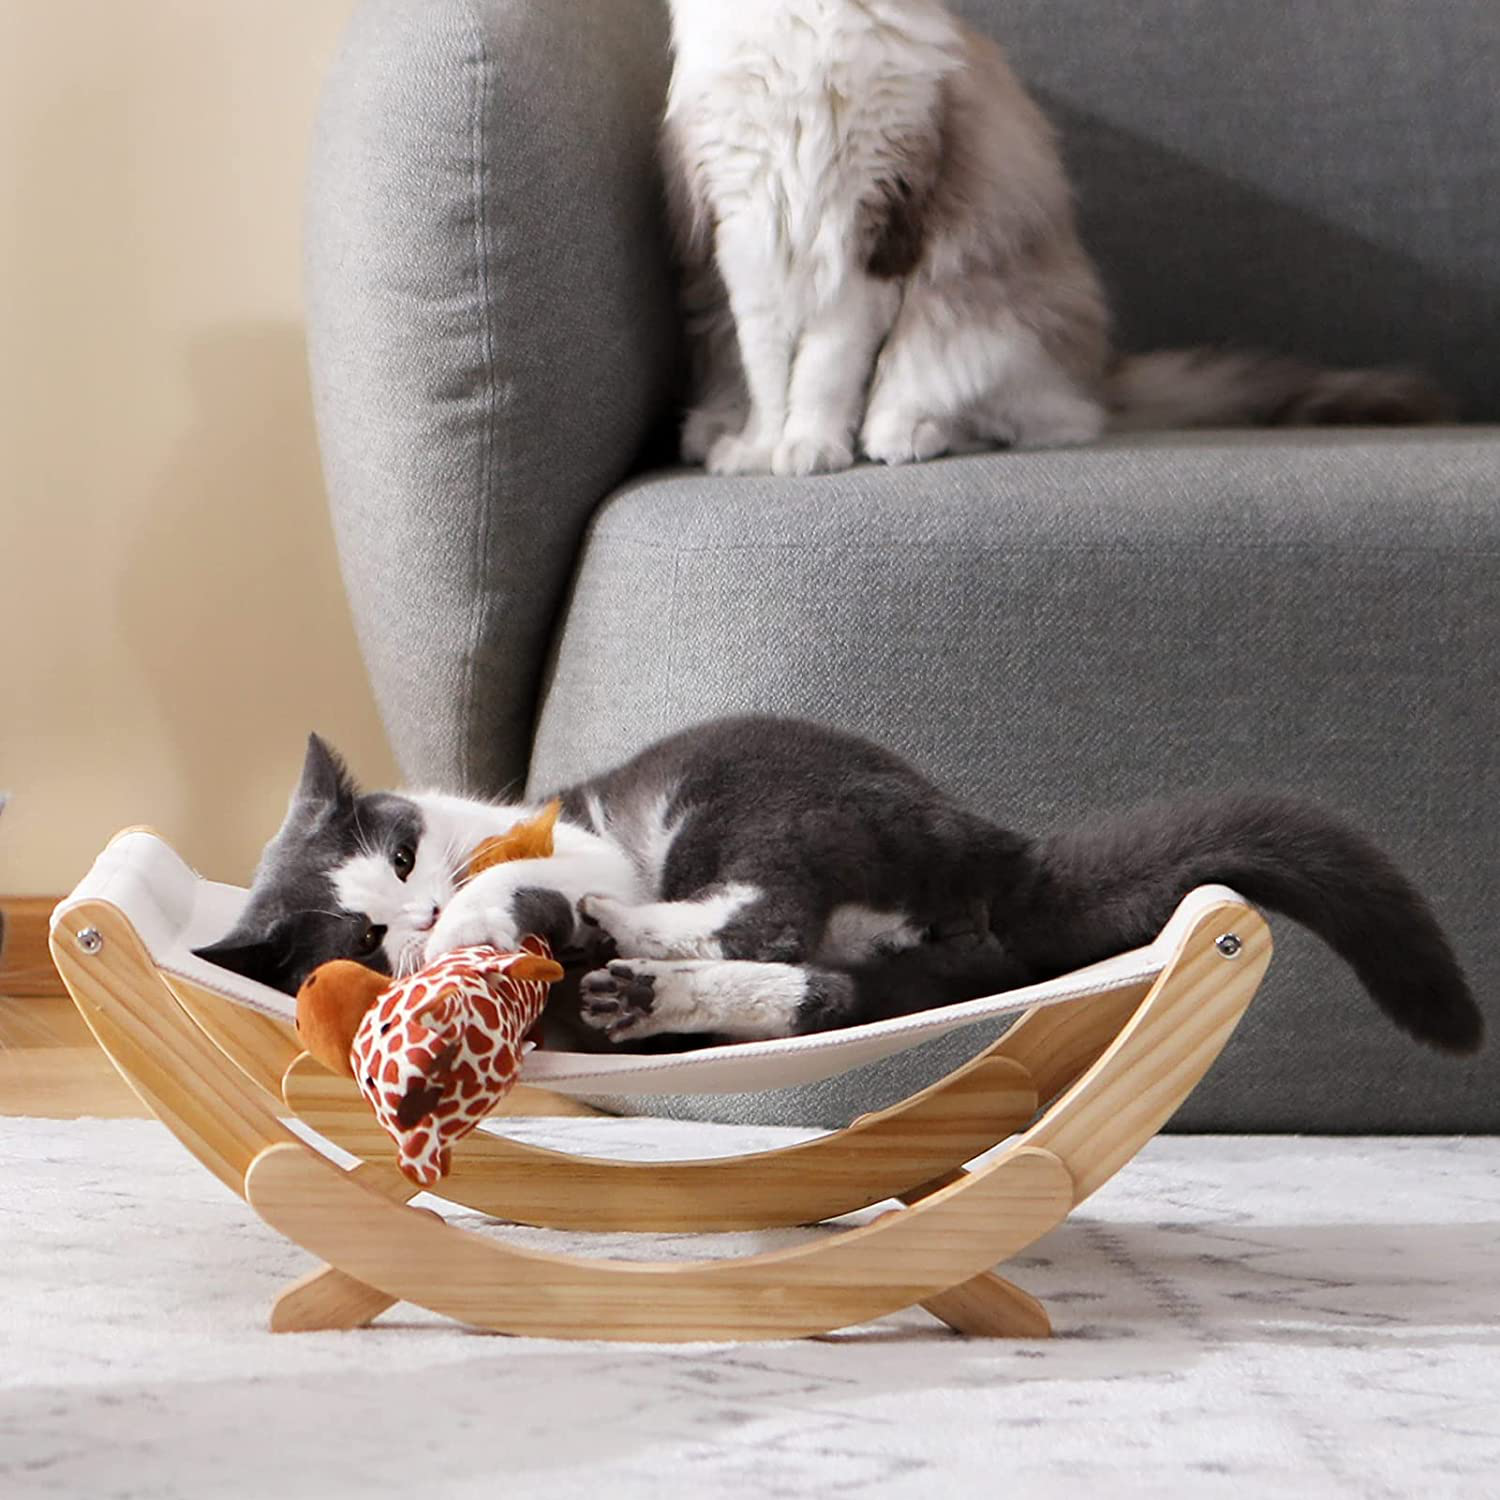 FUKUMARU Cat Hammock - New Moon Cat Swing Chair, Kitty Hammock Bed, Cat Furniture Gift for Your Small to Medium Size Cat or Toy Dog (Upgrade - Beige)